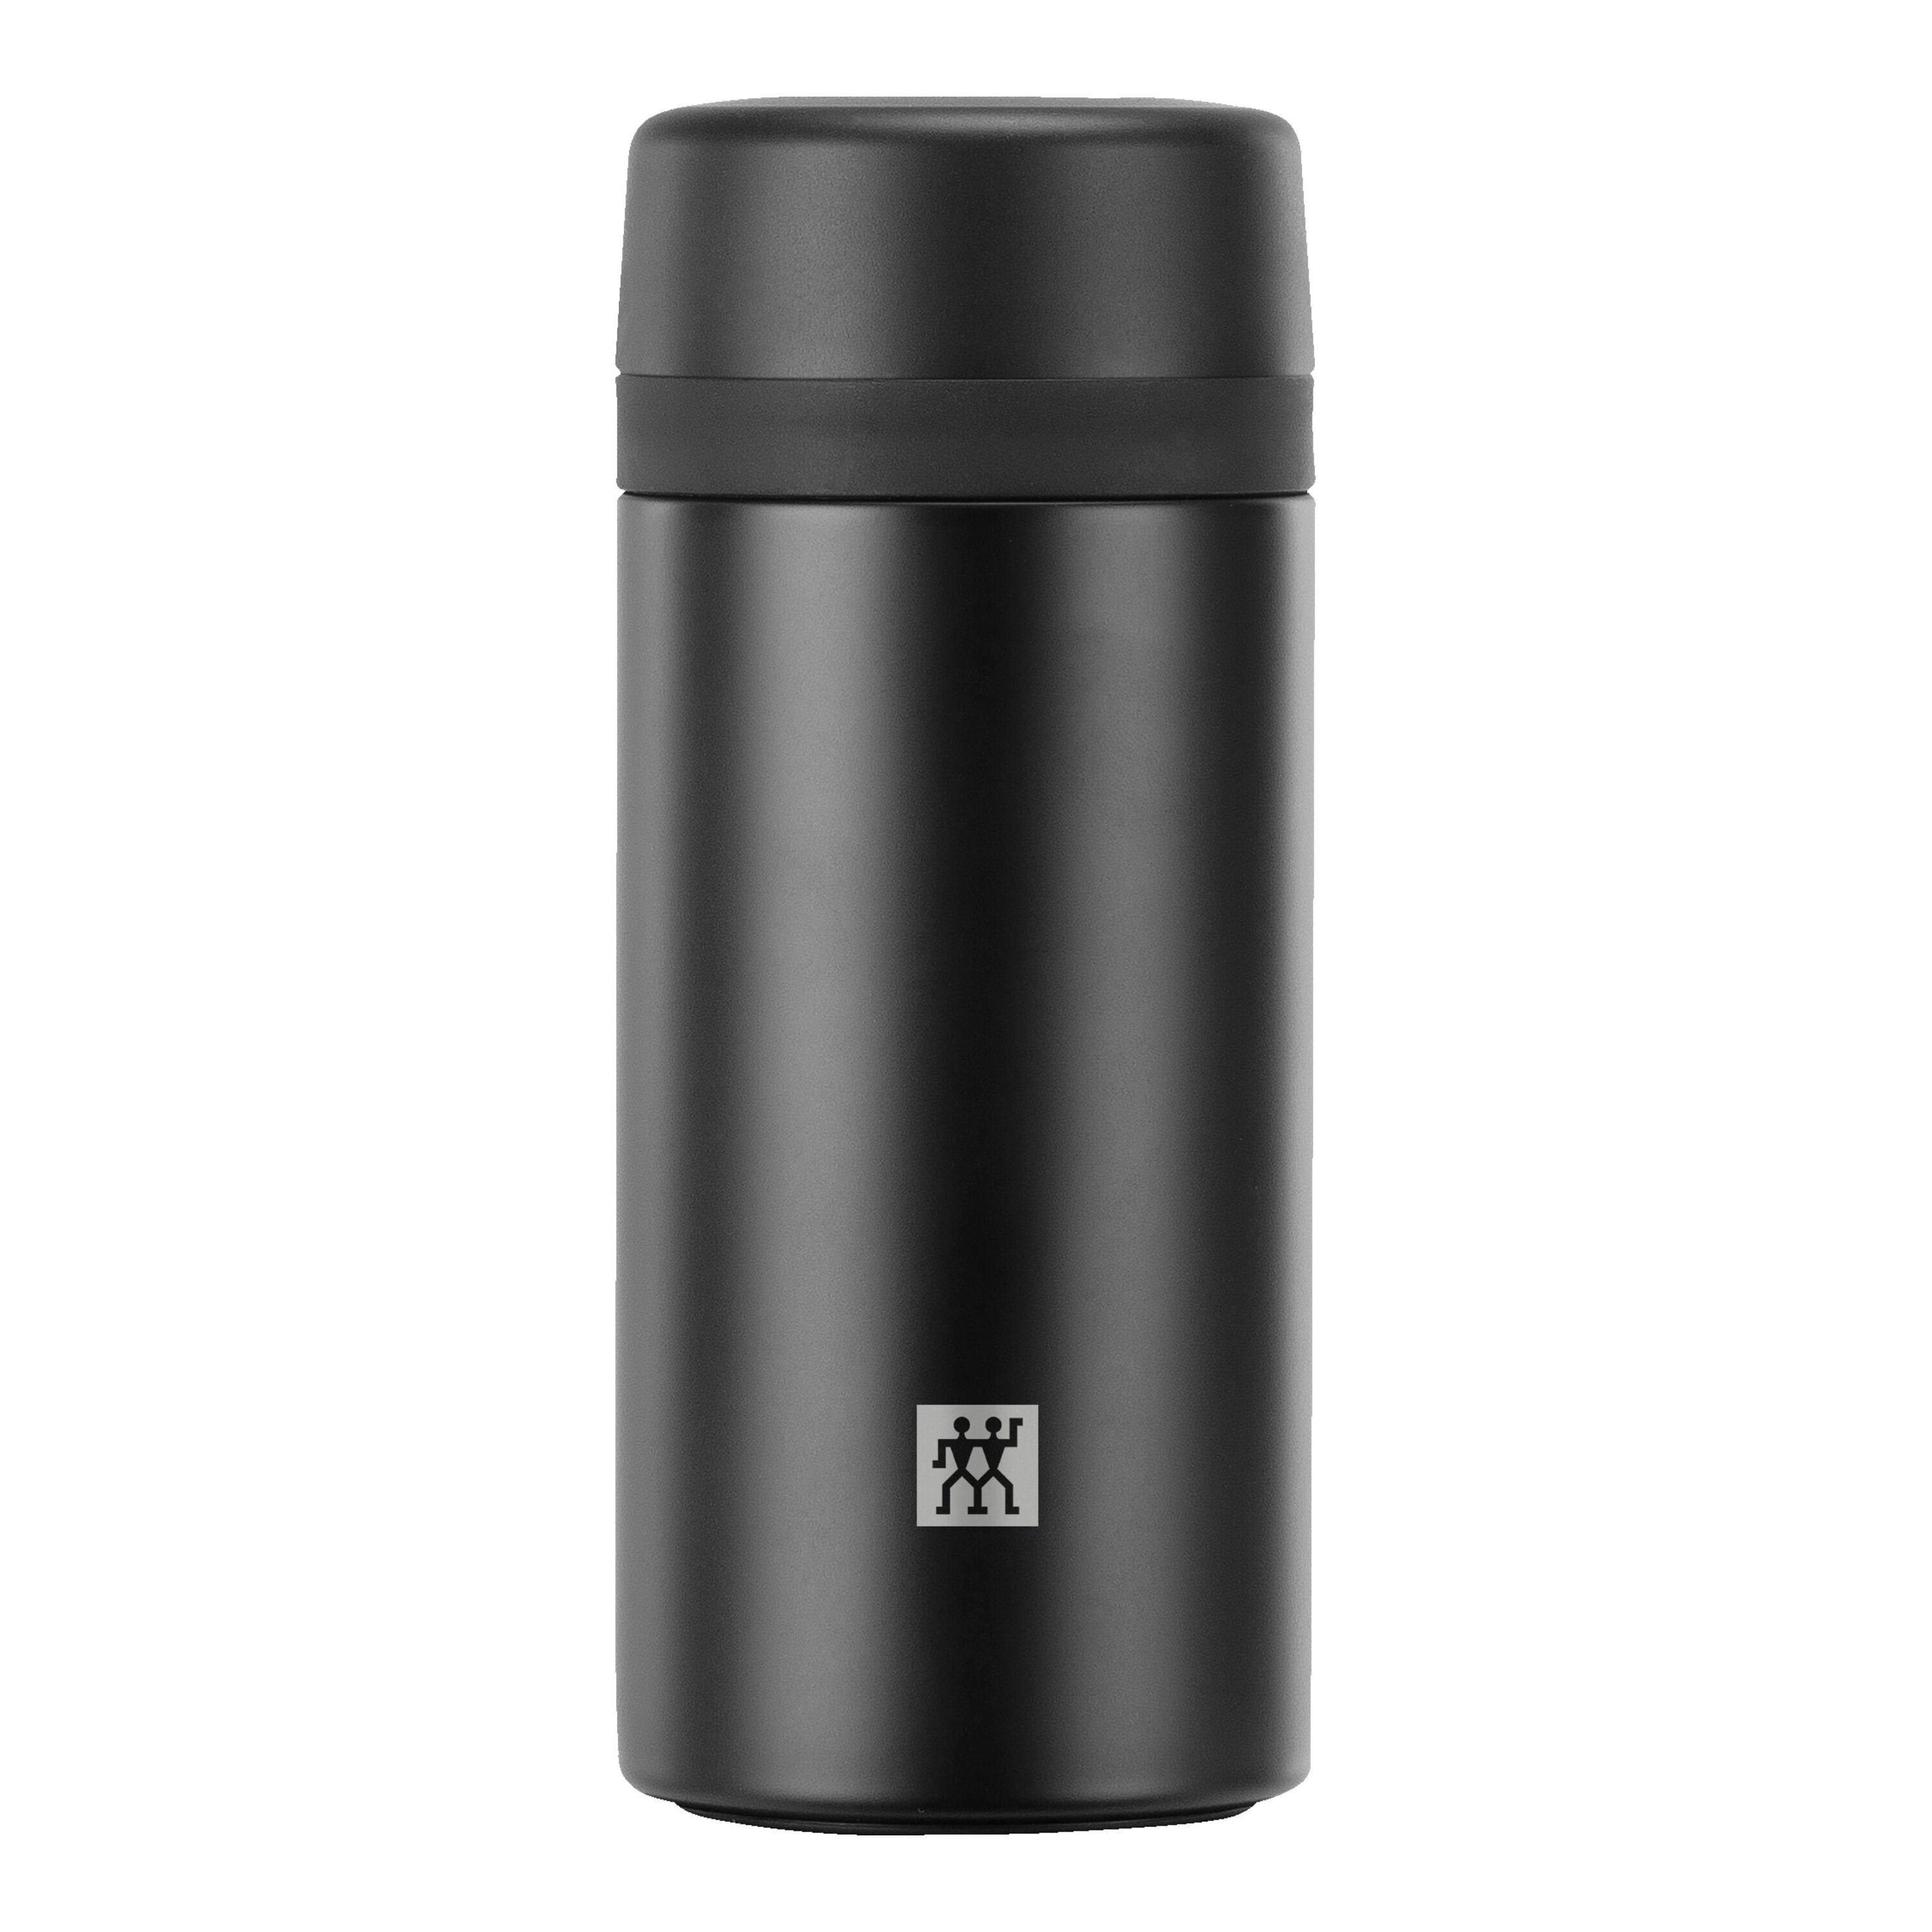 Drink Bottle Tea Thermo - Thermos Vacuum Flask Tea Water Filter